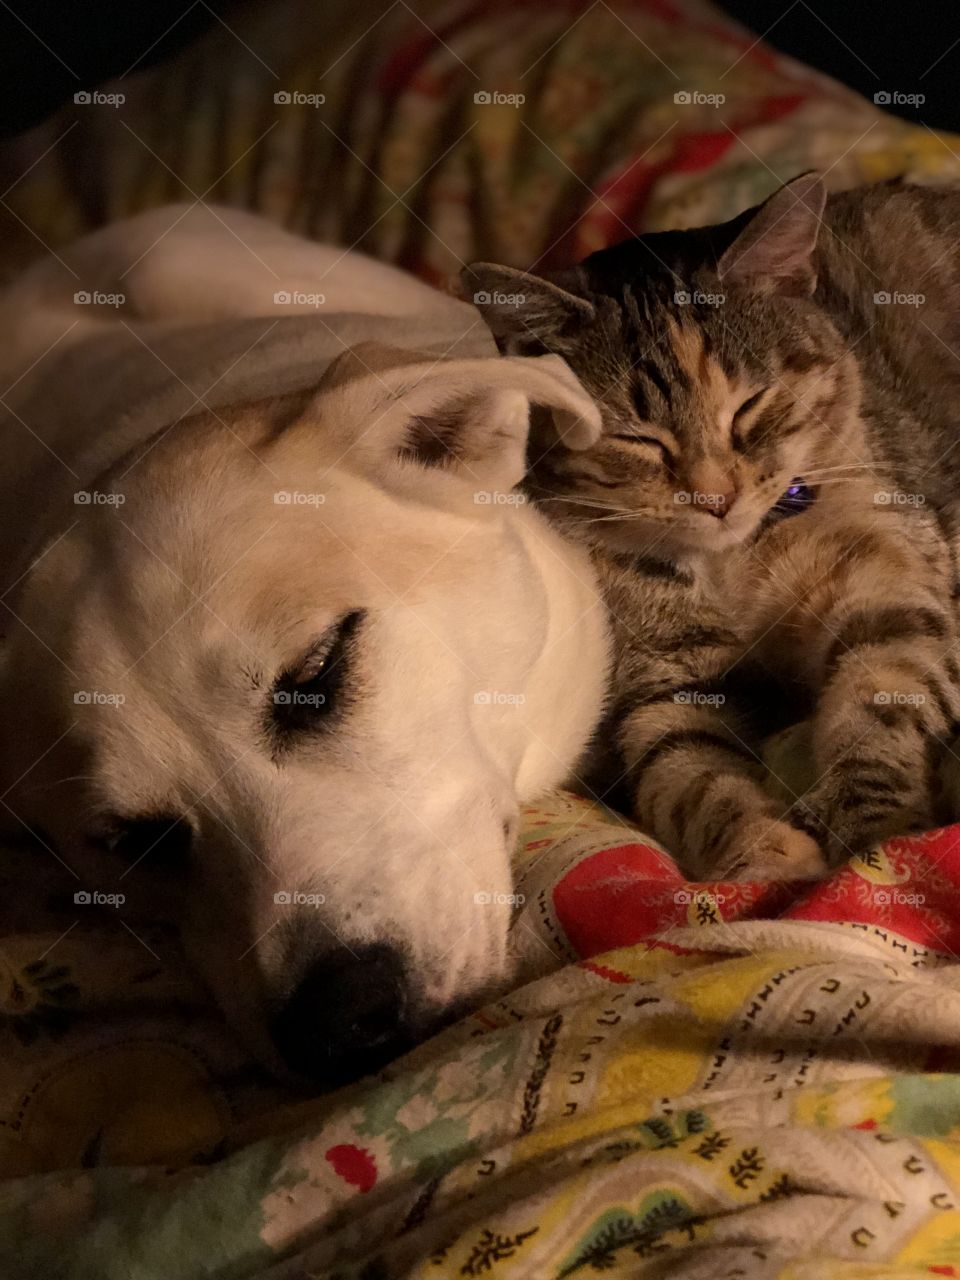 Dog and cat snuggling in bed